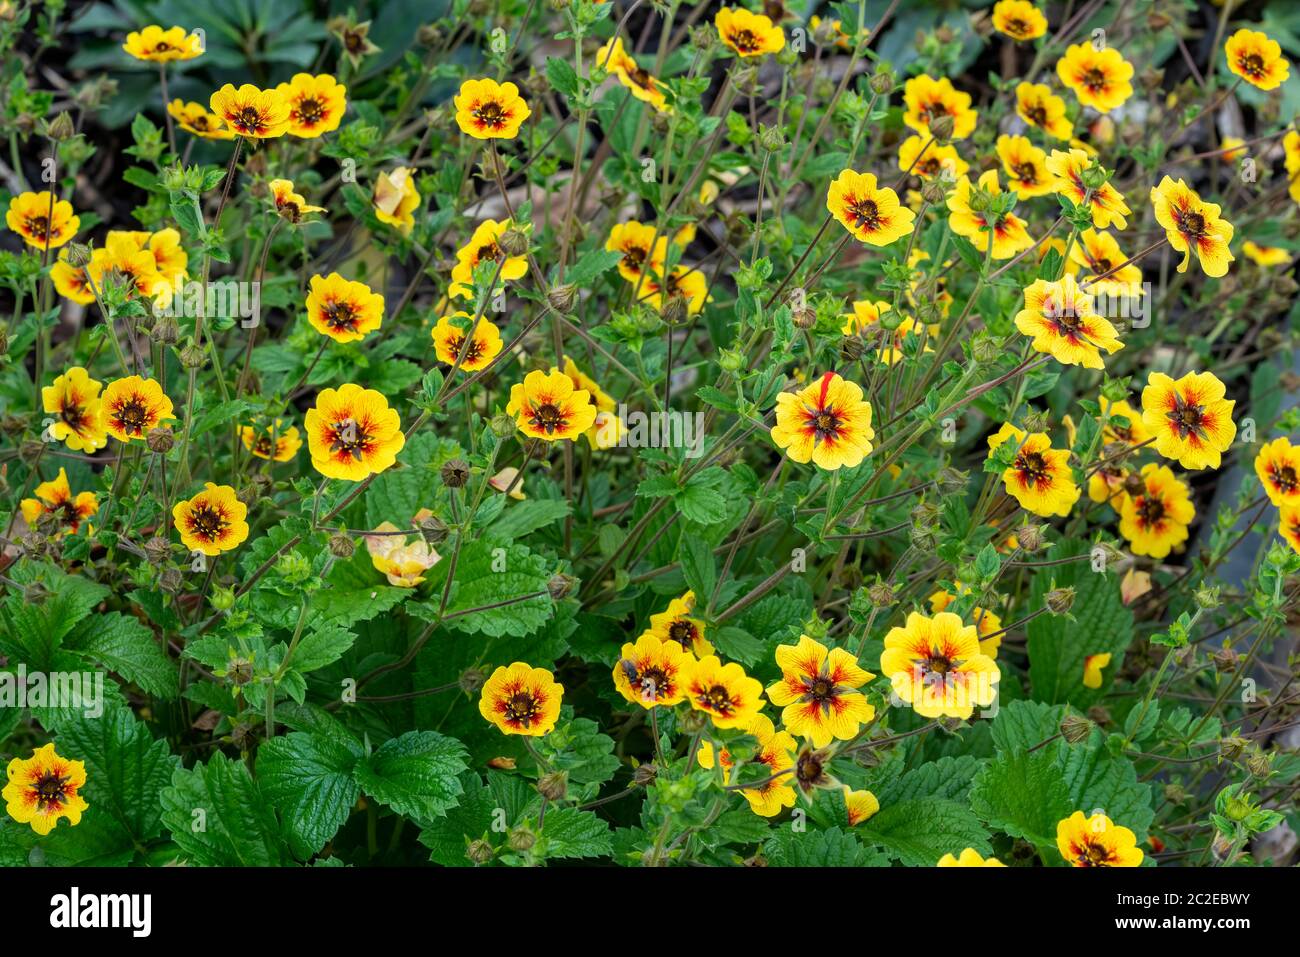 Potentilla 'Esta Ann' a yellow red flowered plant commonly known as cinquefoil Stock Photo